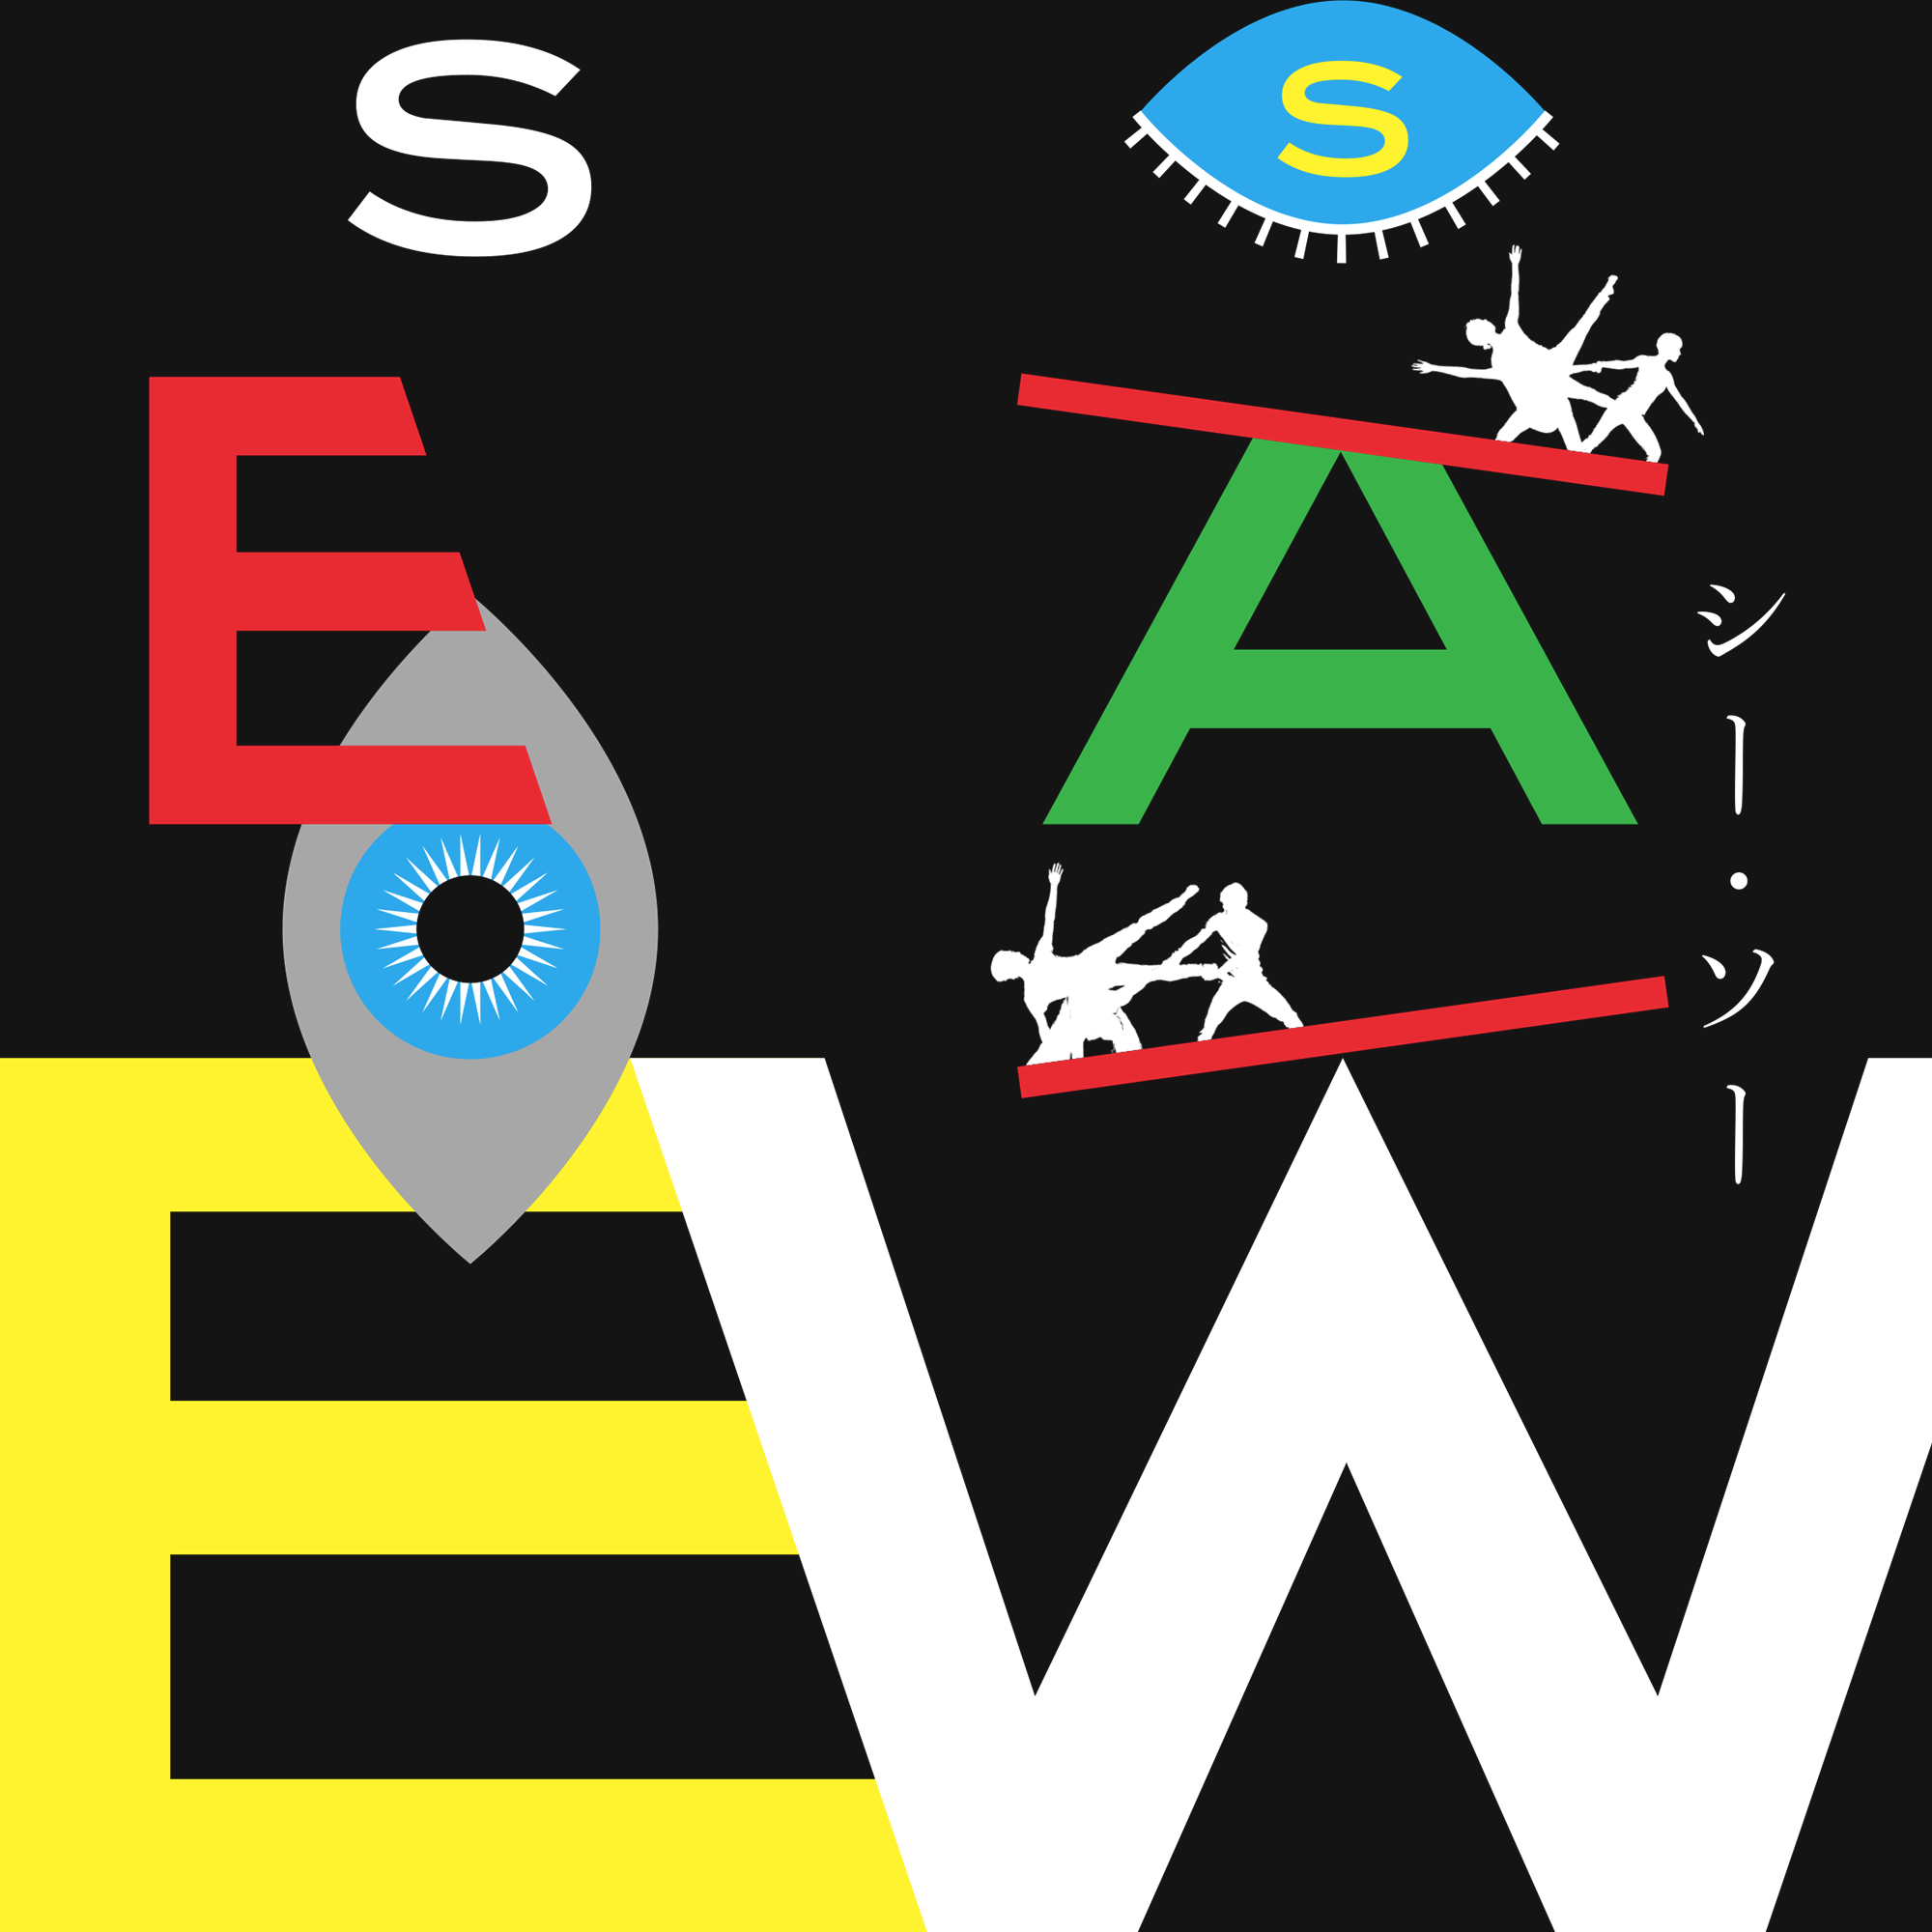 SEE SAW（シー・ソー）